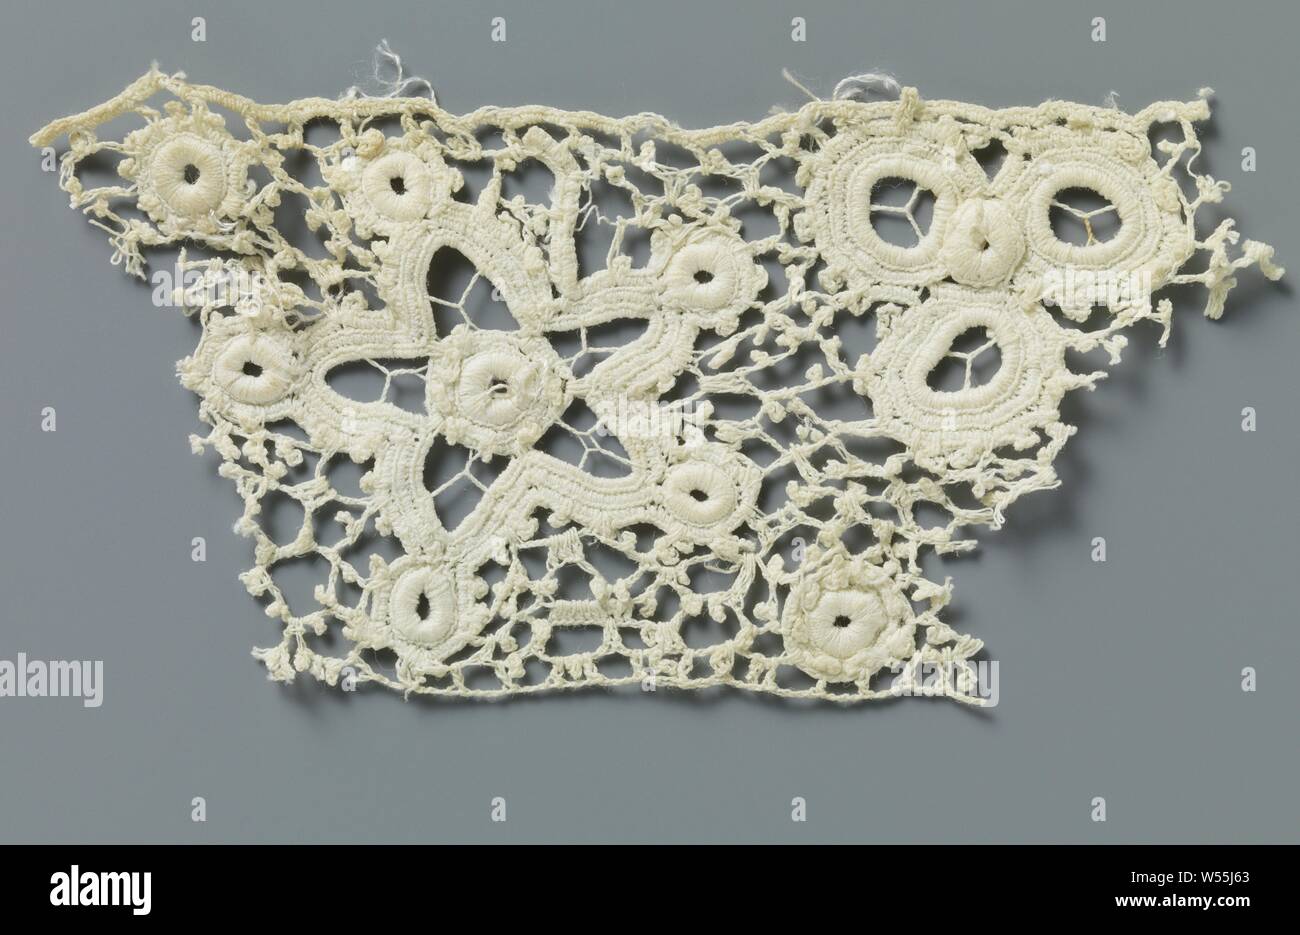 Strip crocheted lace with five-pointed stars and flowers made with open circles, Part of a strip of natural-colored Irish crocheted lace. The original, repeating pattern consists of a double row with a total of eight triangular floral patterns made with open circles, interspersed with one five-pointed star with a circle in the middle and a circle at each point. Crocheted irregular mesh with picots. Top and bottom are finished with a straight edge., anonymous, Ierland, c. 1890 - c. 1909, cotton (textile), l 8.5 cm × w 5.5 cm Stock Photo